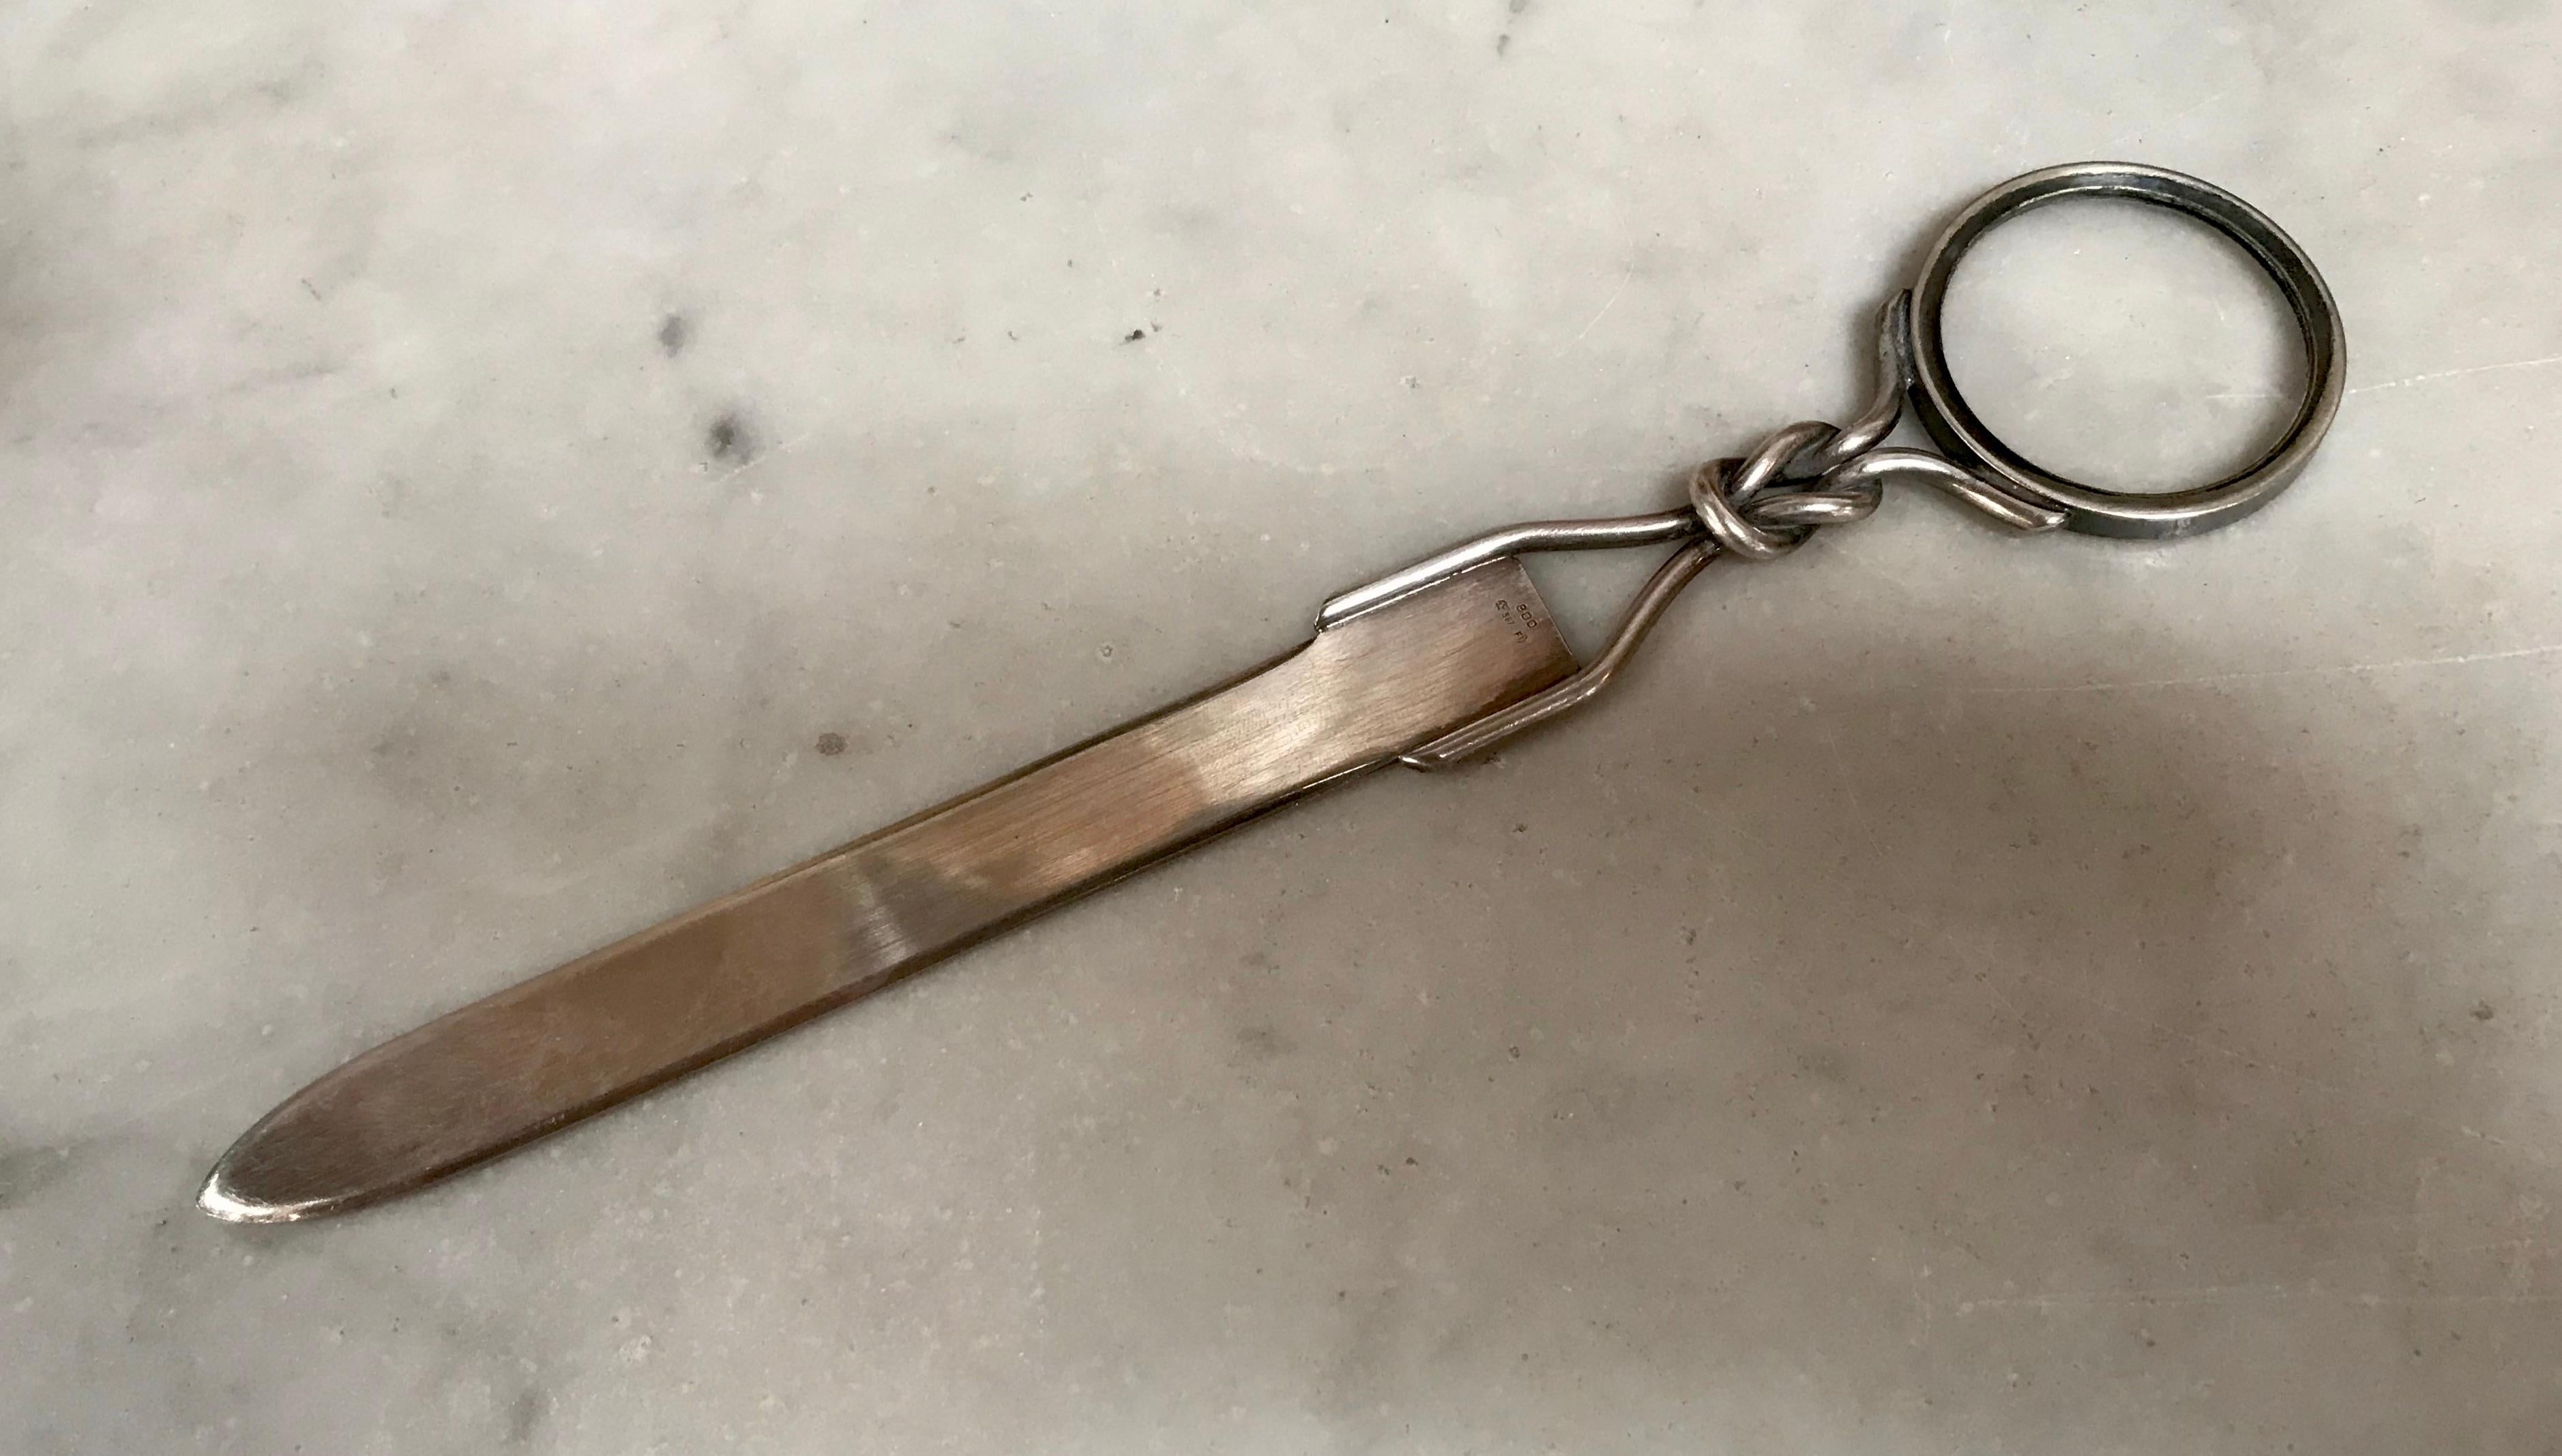 Vintage silver letter opener with magnifying glass. Italy, 1980s
No visible maker’s marks.